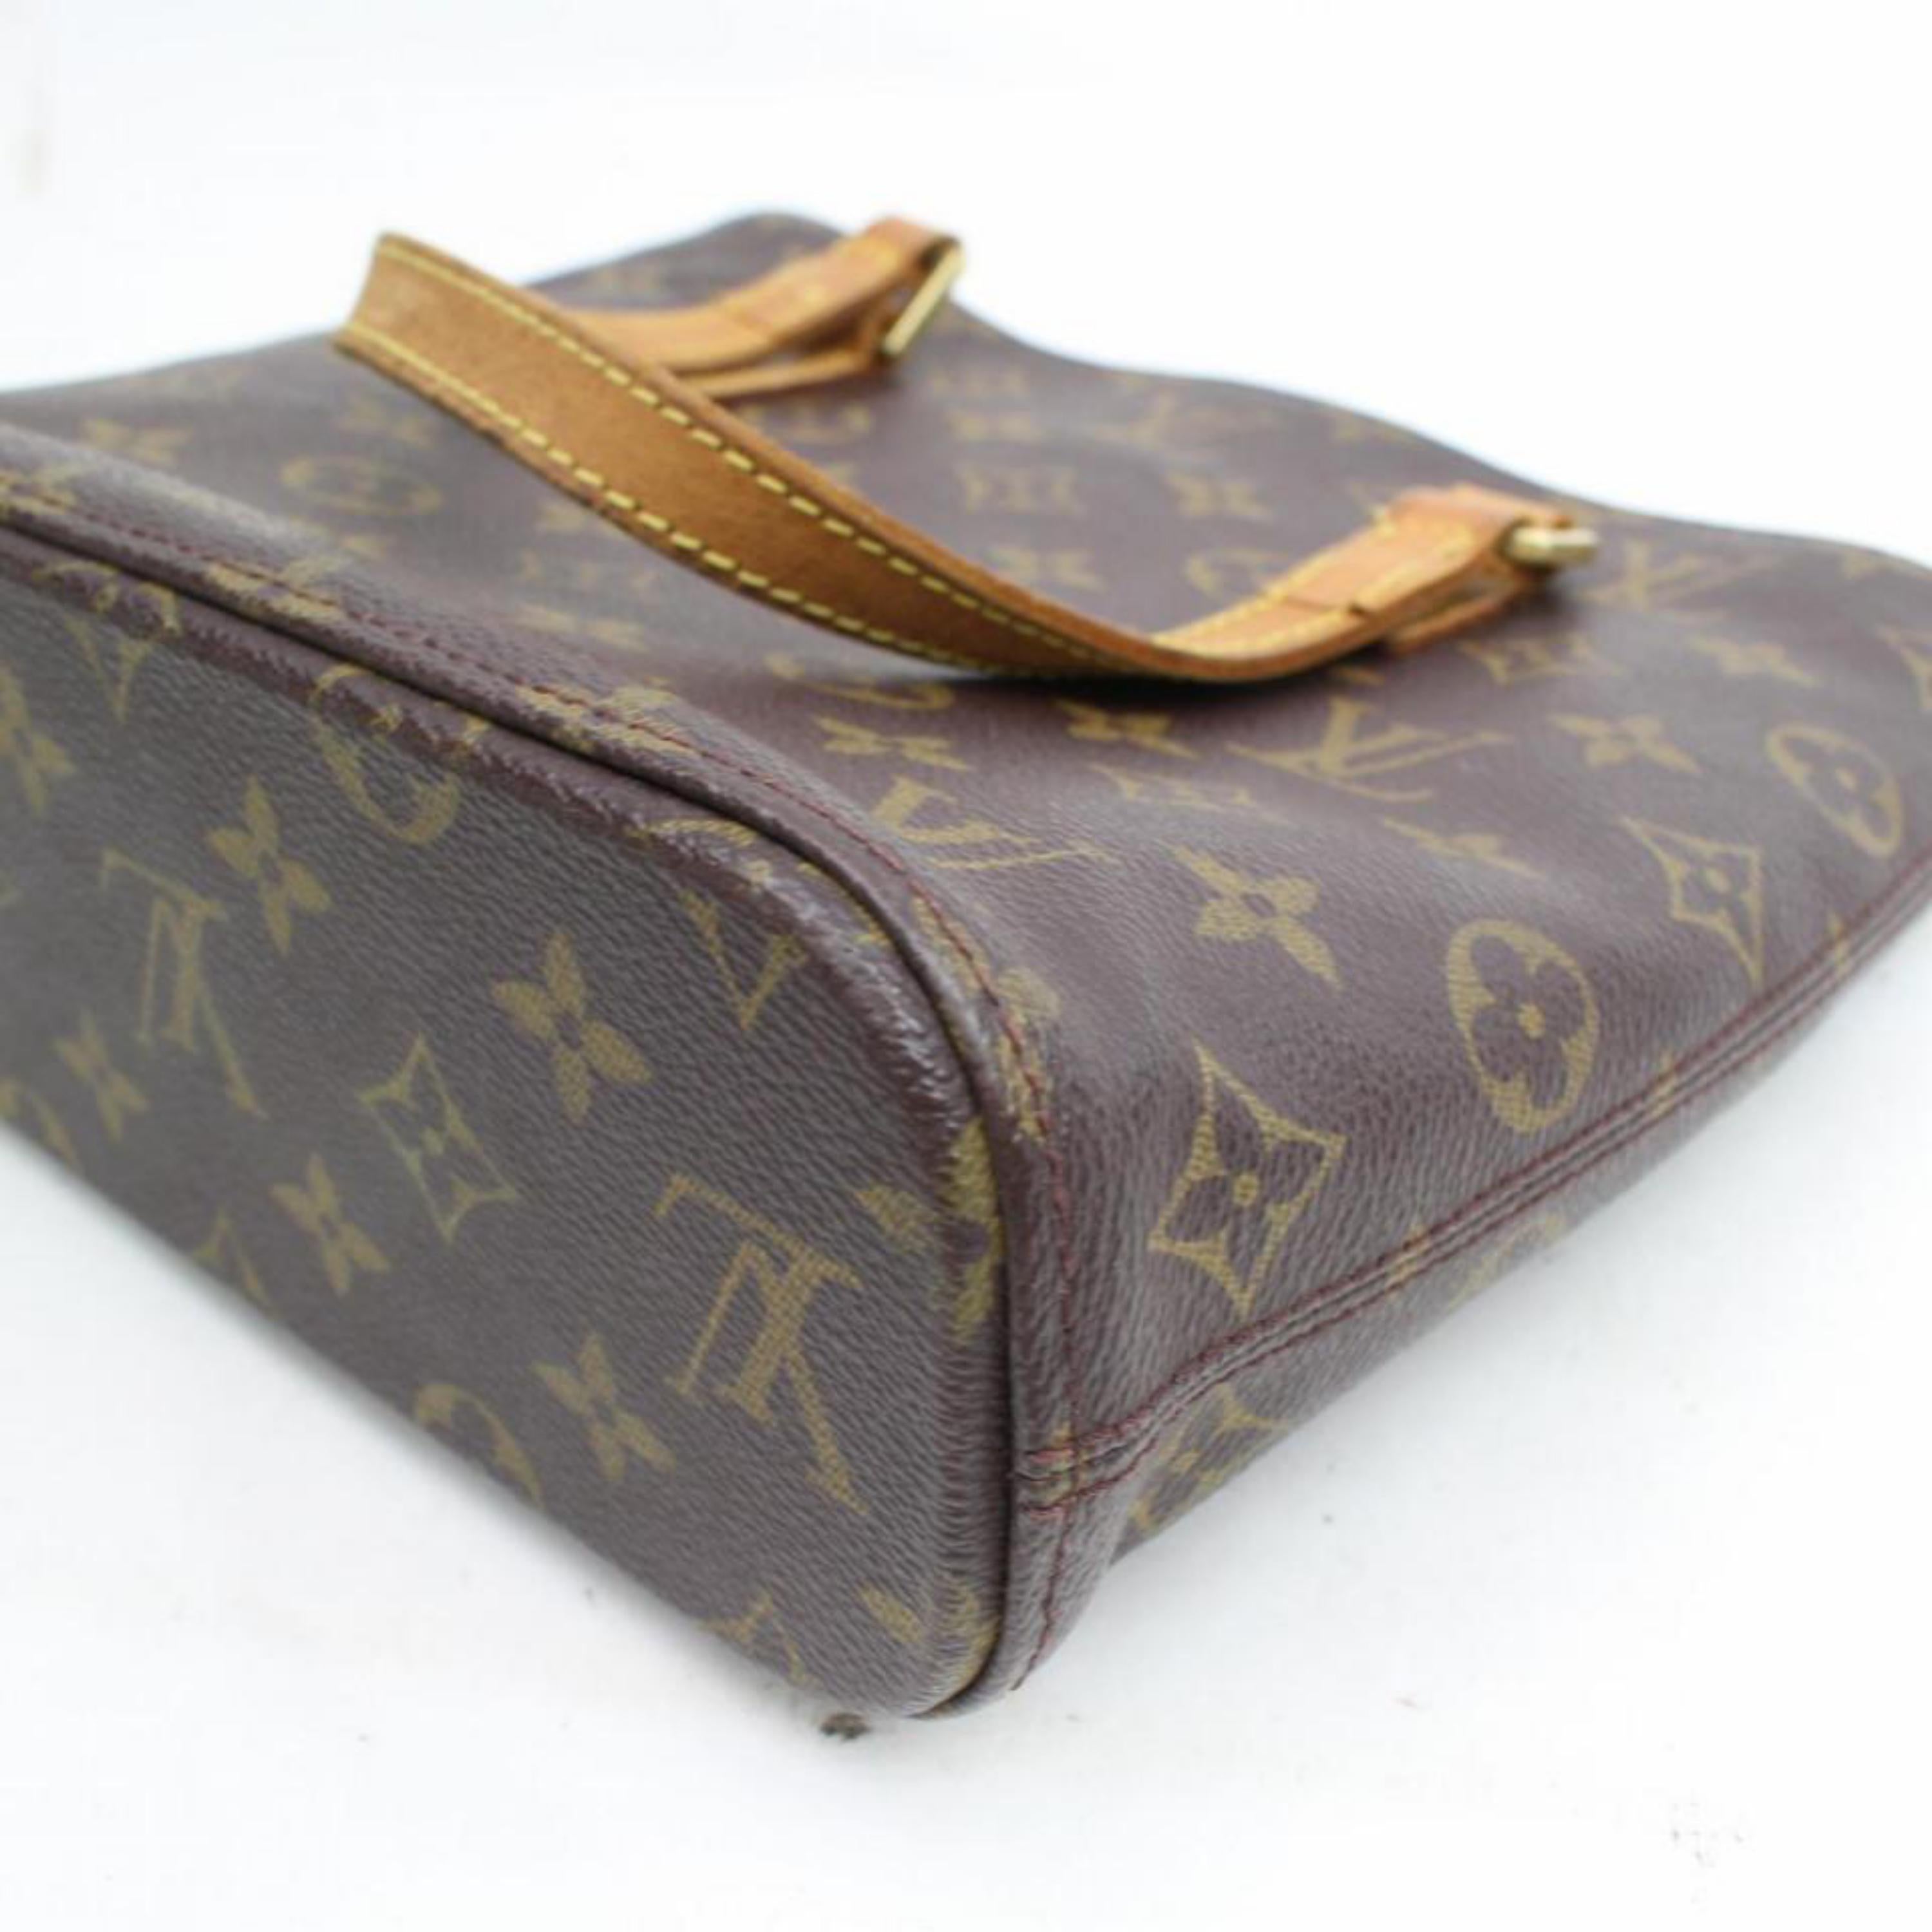 Louis Vuitton Vavin Monogram Pm 868135 Brown Coated Canvas Tote For Sale 5